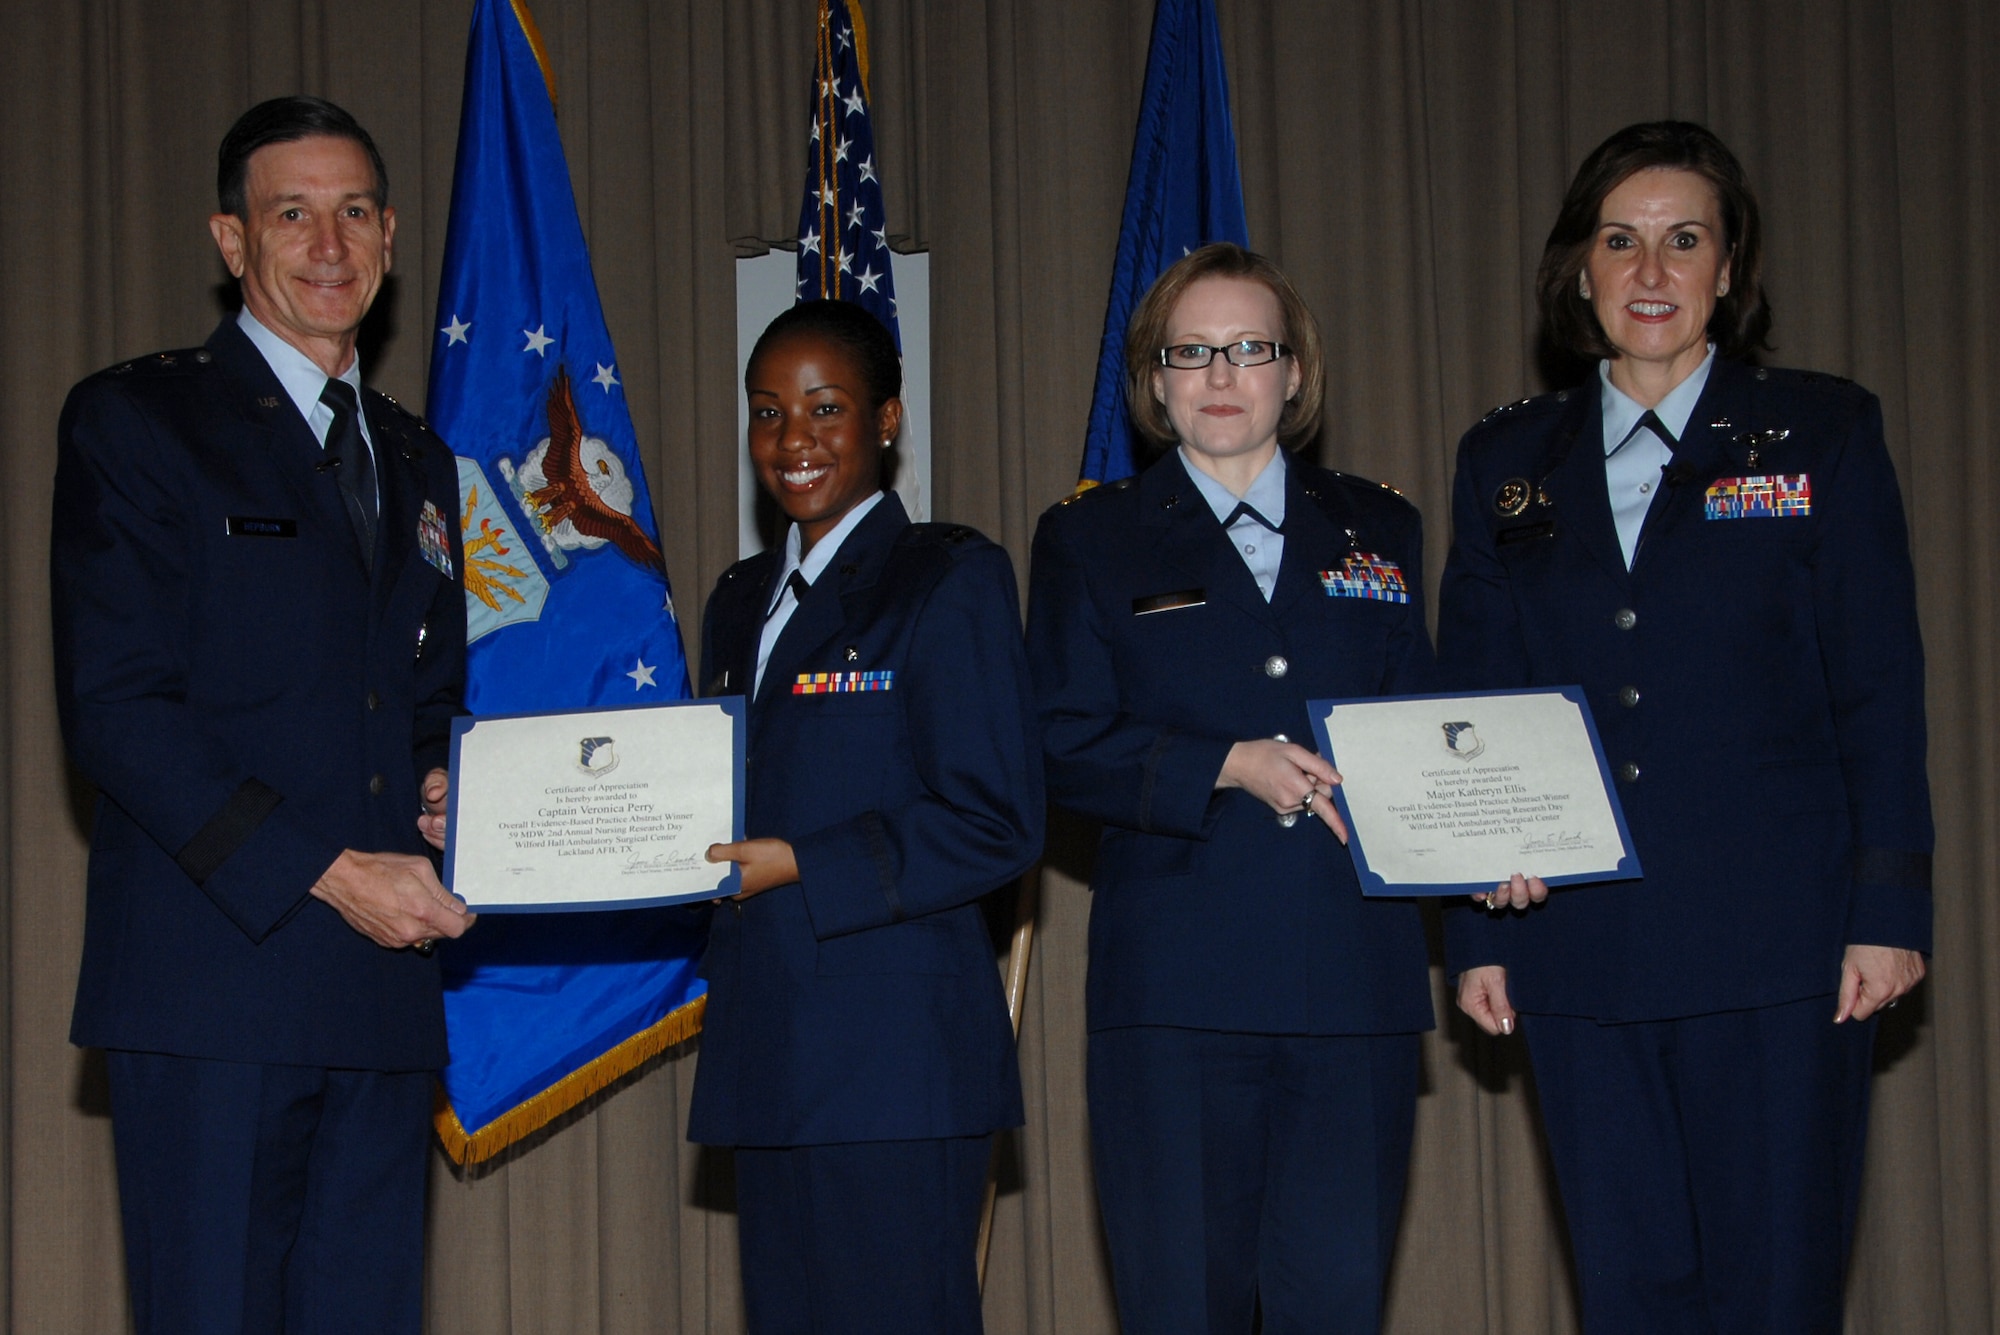 59th Medical Wing Commander Maj. Gen. Byron Hepburn (left) and Maj. Gen. Kimberly Siniscalchi (right) present awards to Capt. Veronica Perry and Maj. Katheryn Ellis for their winning poster Jan. 27, 2012, during the 59th MDW second annual Nursing Research Day at Wilford Hall Ambulatory Surgical Center, Lackland Air Force Base, Texas. Air Force nurses Perry (center left) and Ellis illustrated how two pediatric clinical nurse specialists sought to move from a tradition-based to an evidenced-based practice. Siniscalchi is assistant Air Force Surgeon General, Medical Force Development, and assistant Air Force Surgeon General, Nursing Services. (U.S. Air Force photo by Harold China)